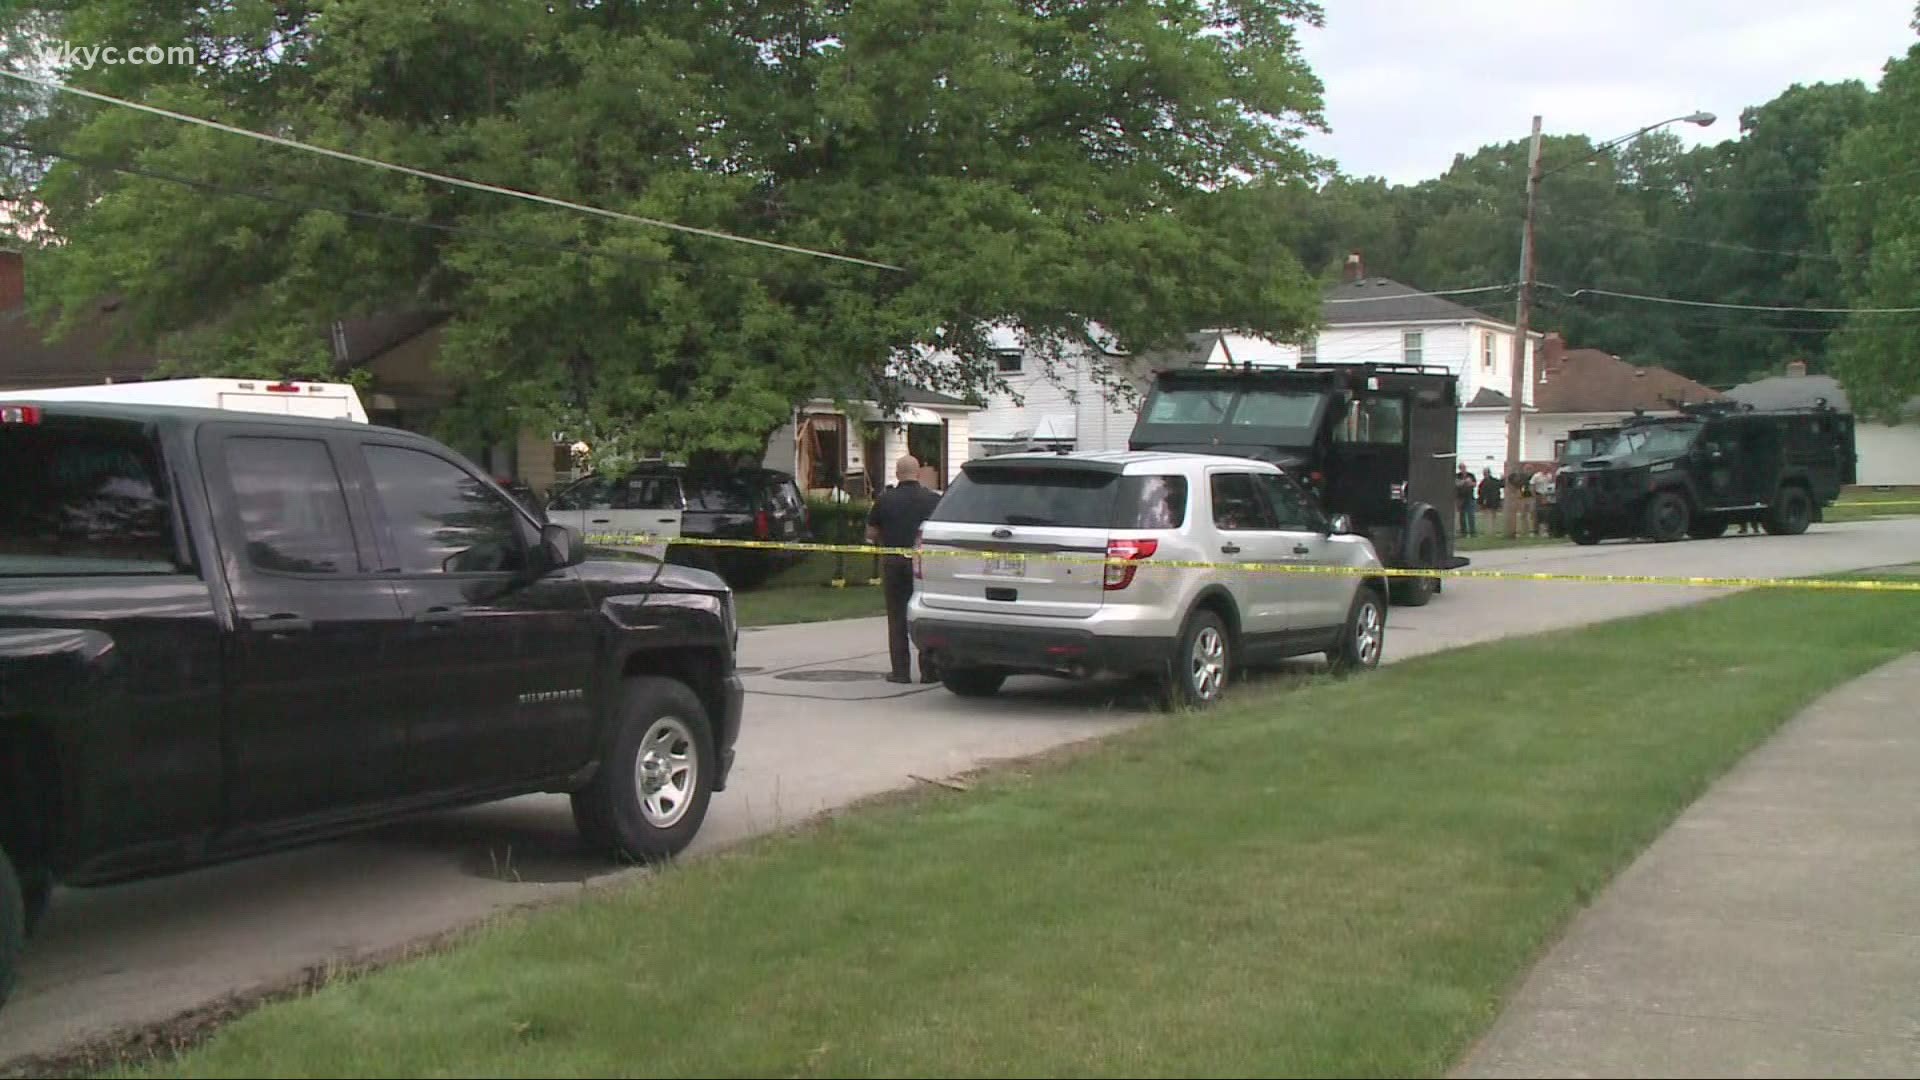 A 64-year-old man is dead following a standoff that last more than 12 hours in Parma at a home on South Park Boulevard.